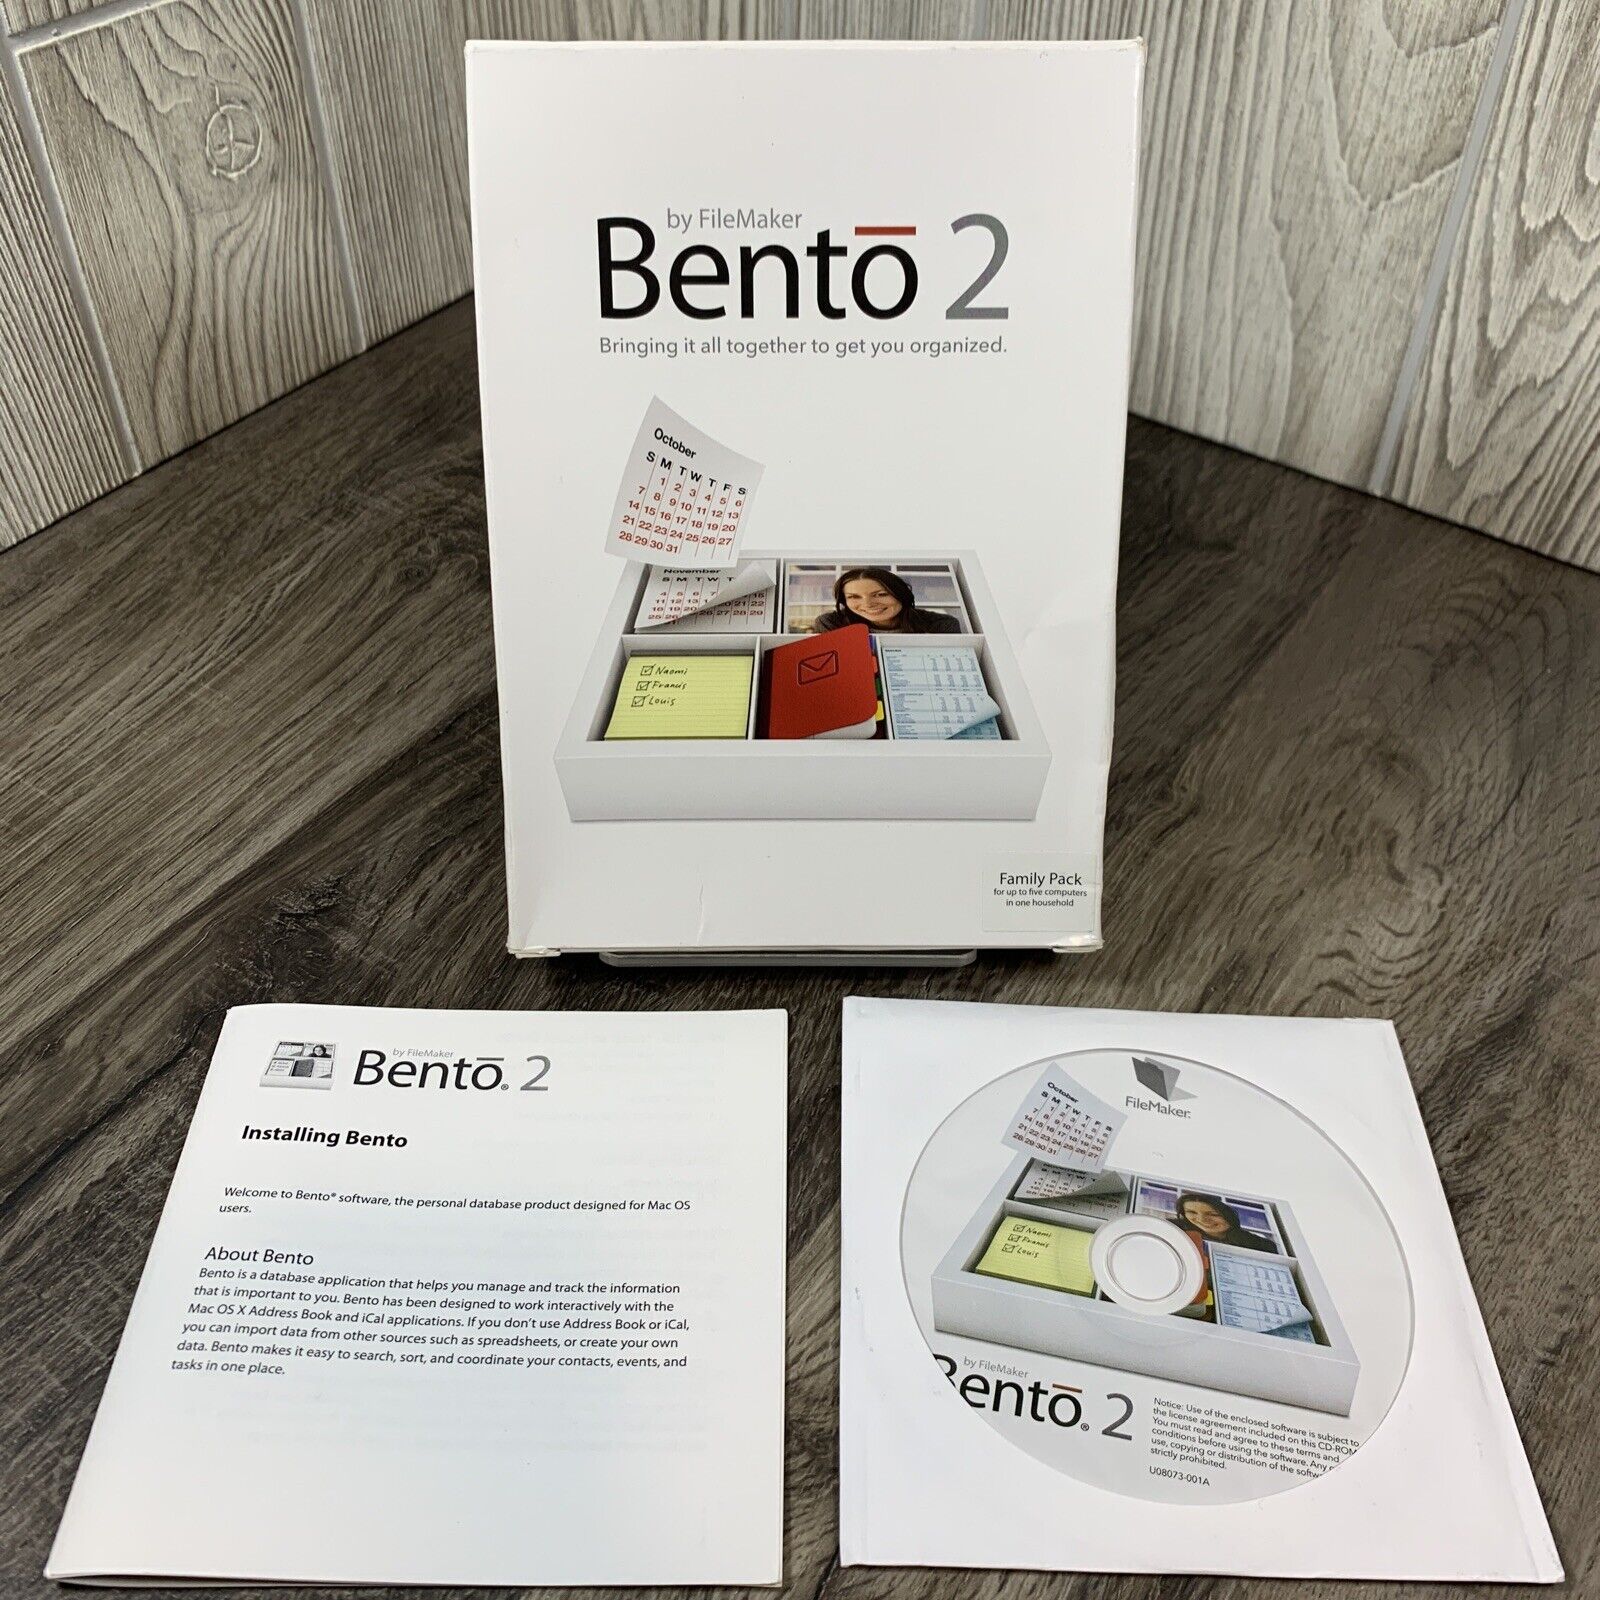 BENTO 2 By FileMaker - Family Pack Box - Mac Power PC G4 G5 - 5 Computer Access